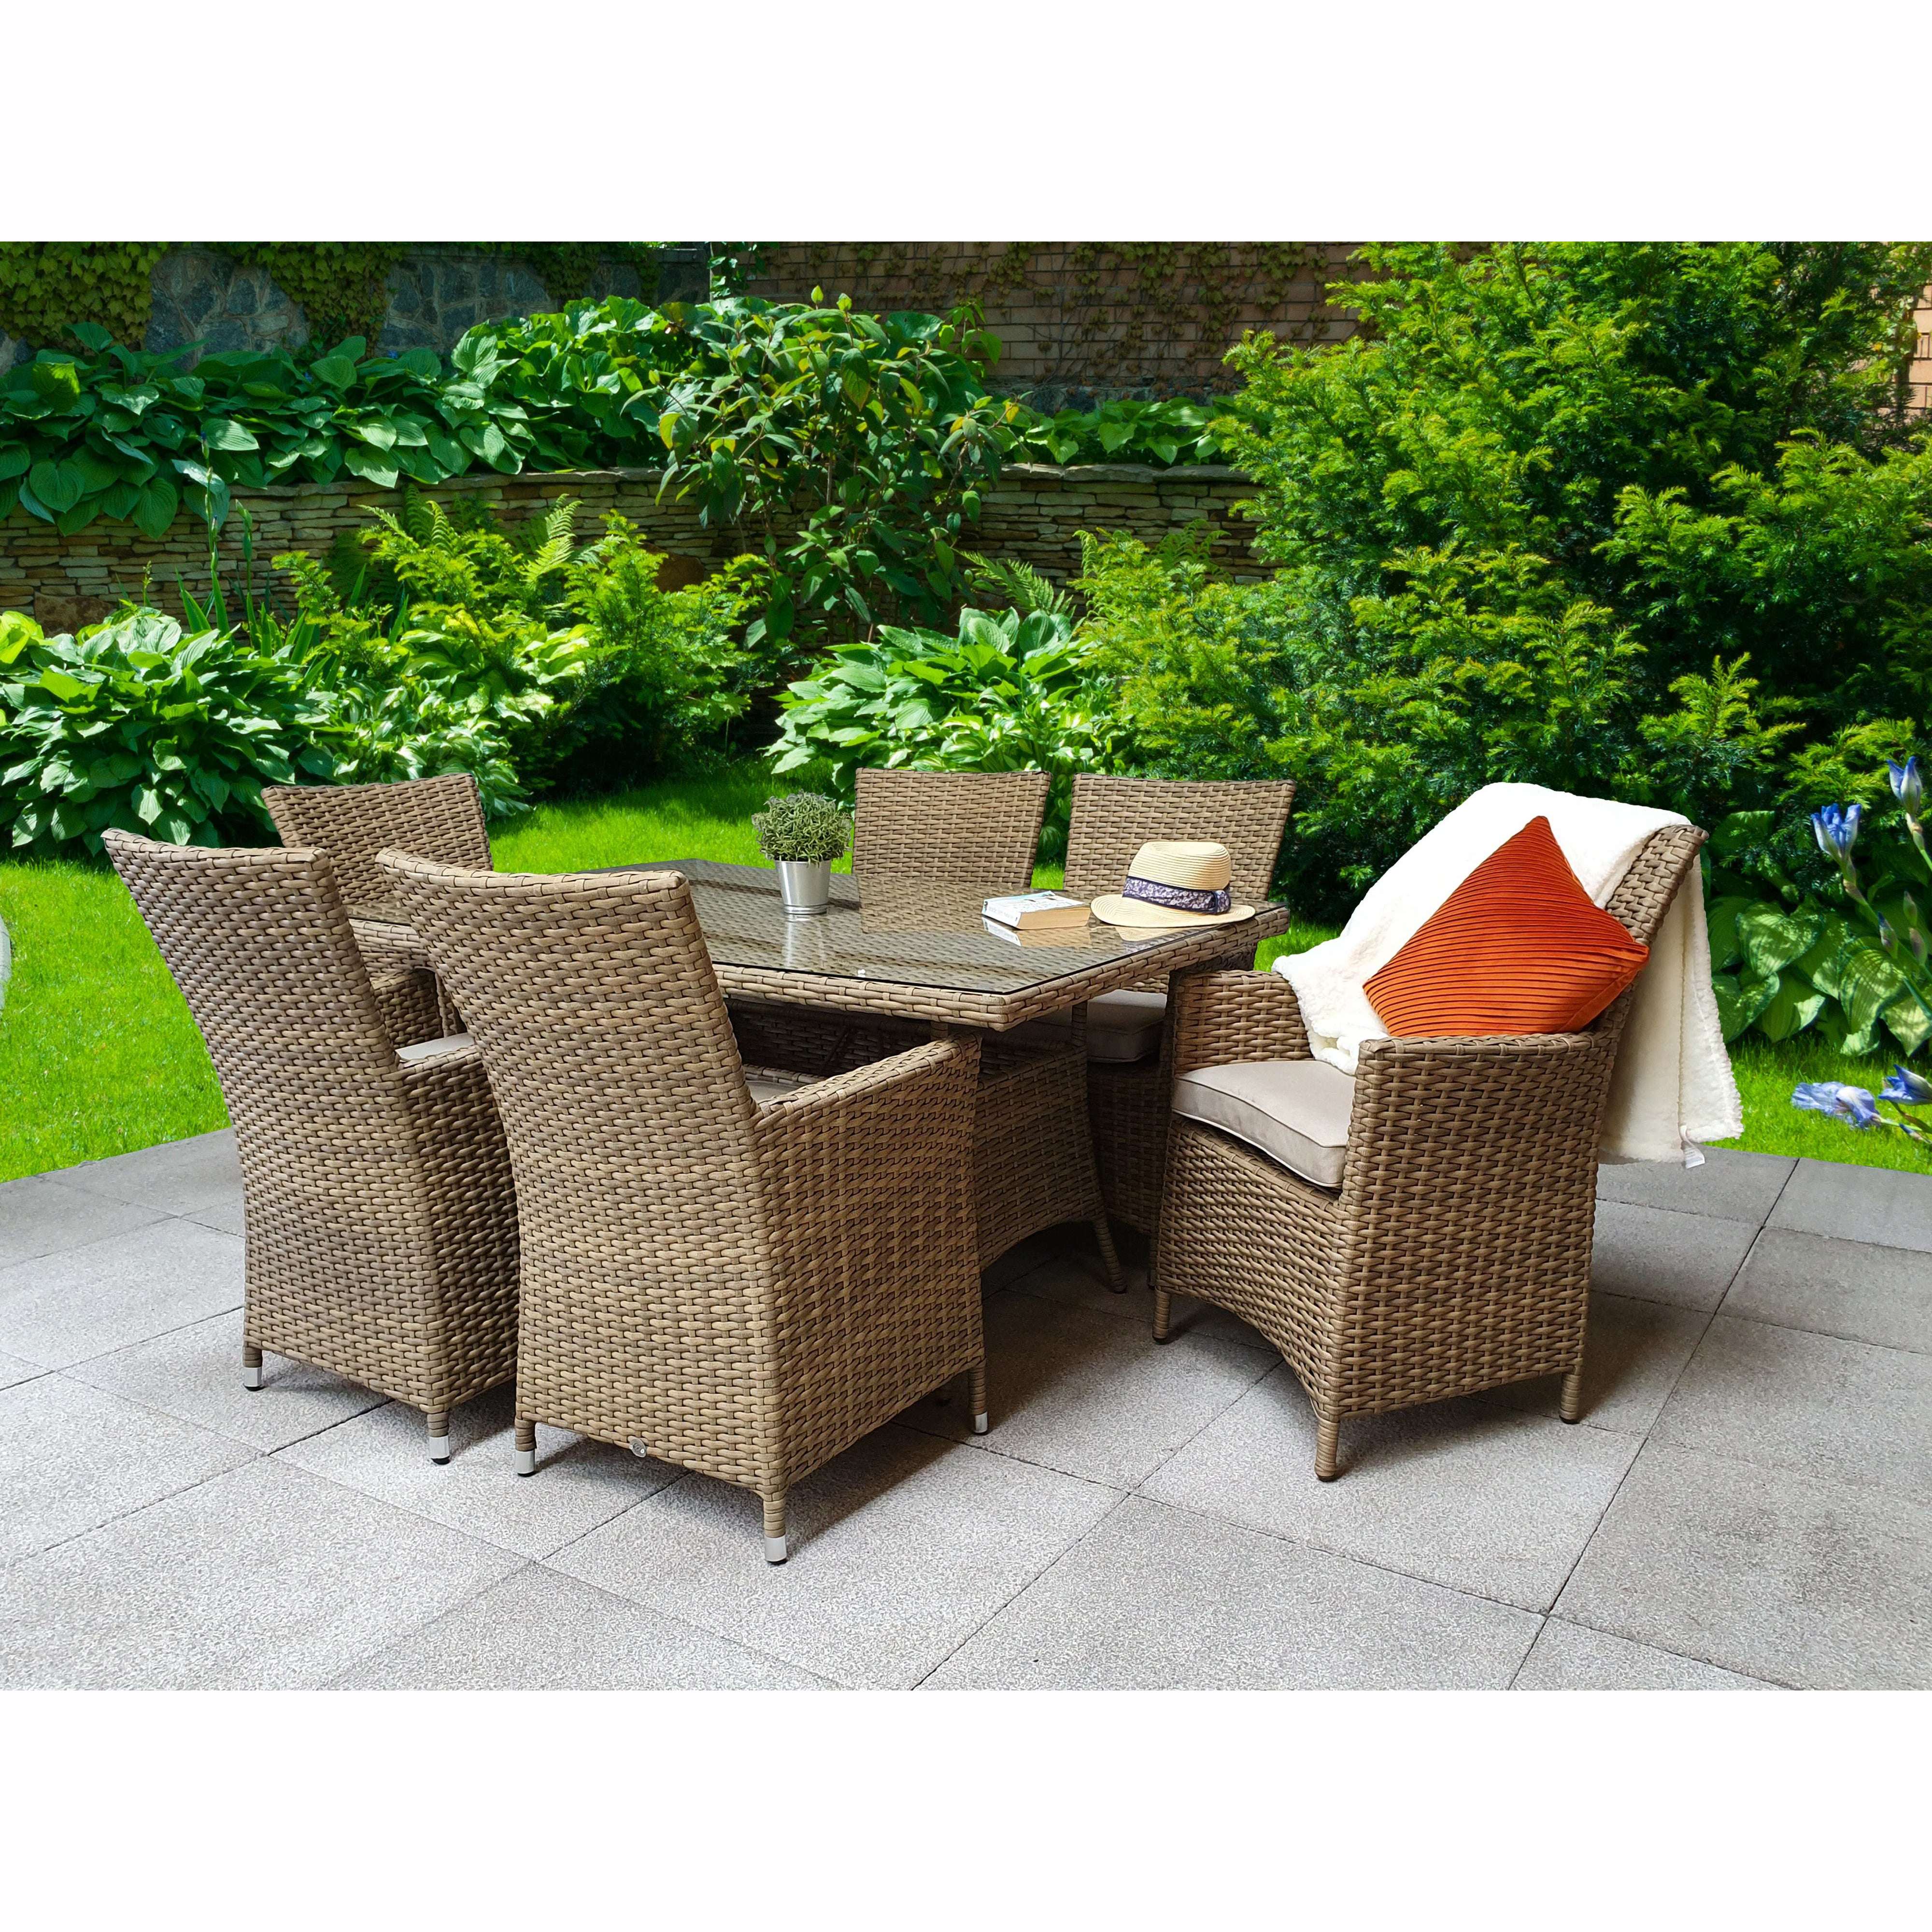 Exceptional Garden:Signature Weave Darcey 6-Seater Dining Set with Rectangular Table and High Back Chairs